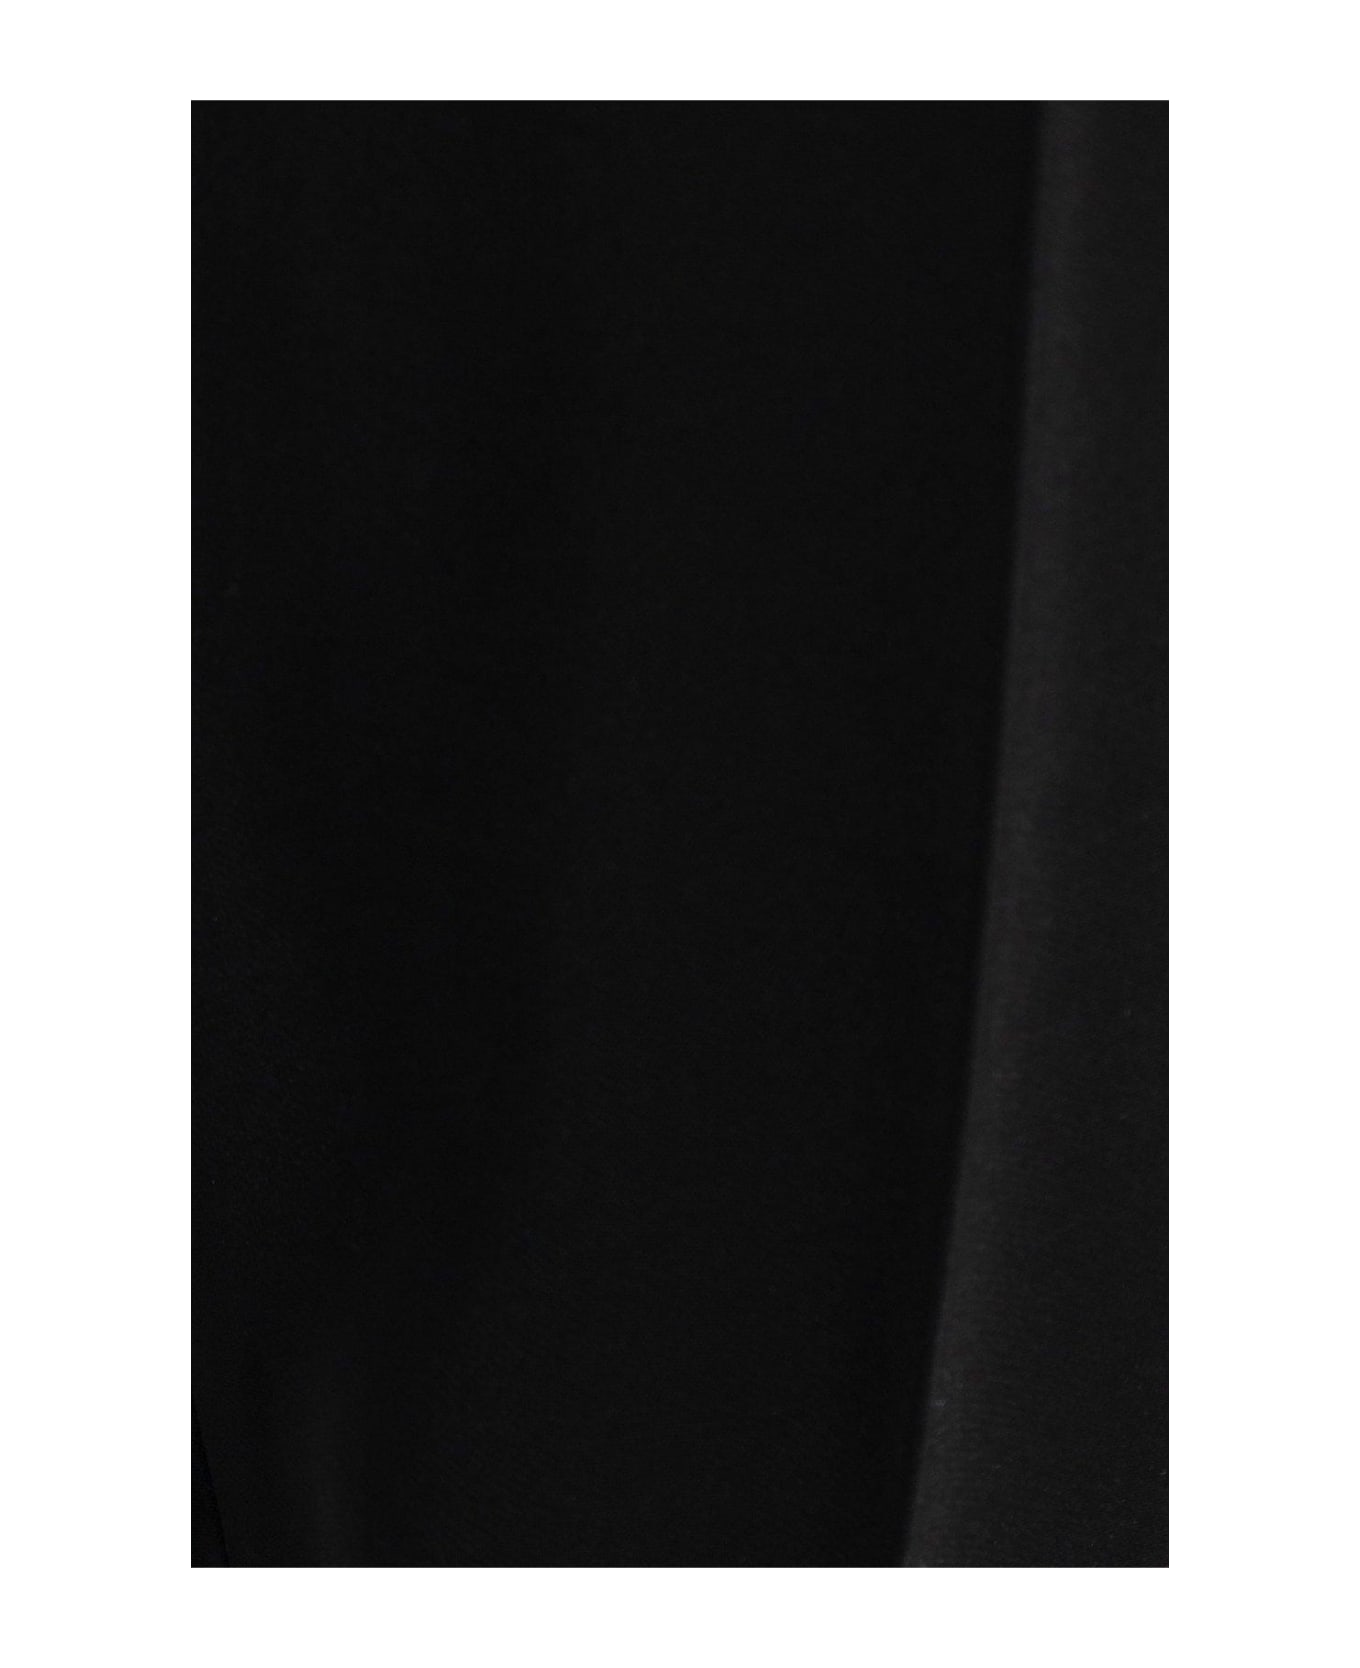 Stella McCartney Pleated Front Trousers - Black